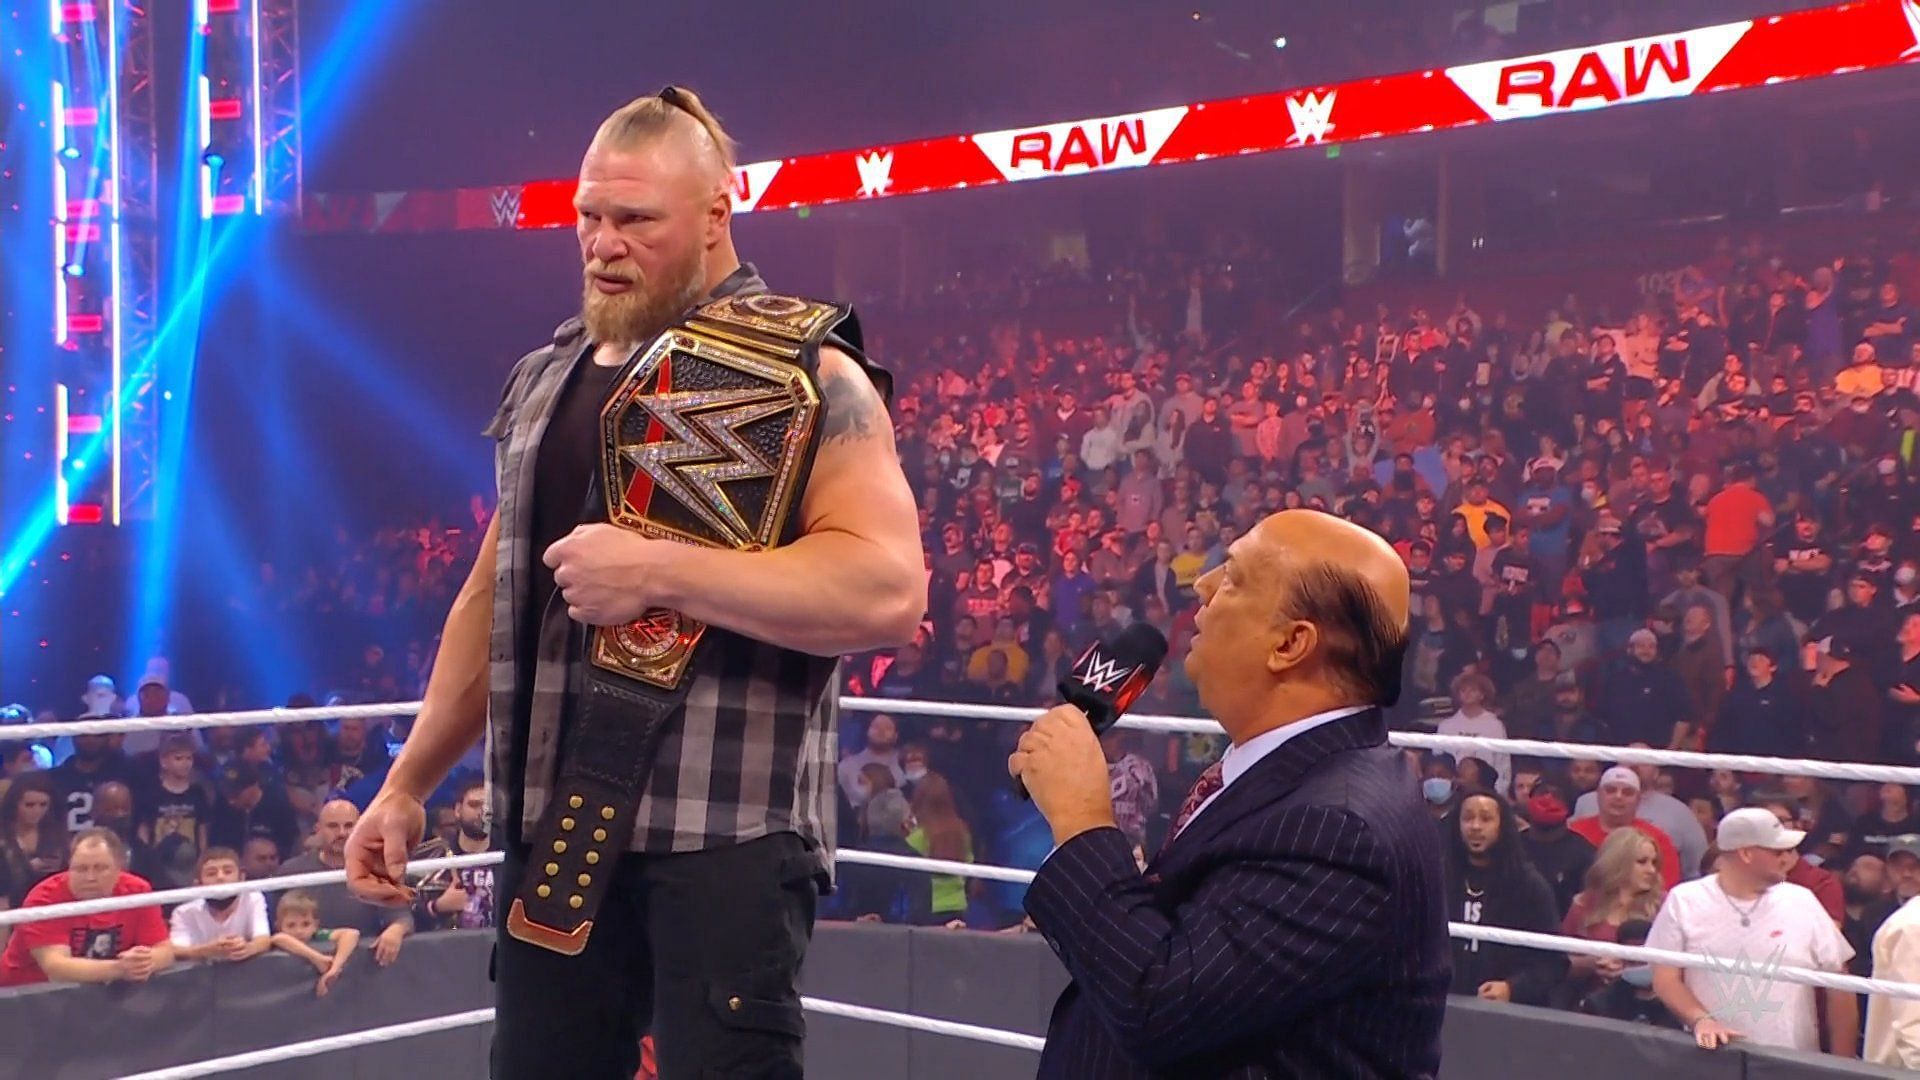 Brock Lesnar has been entertaining on the microphone